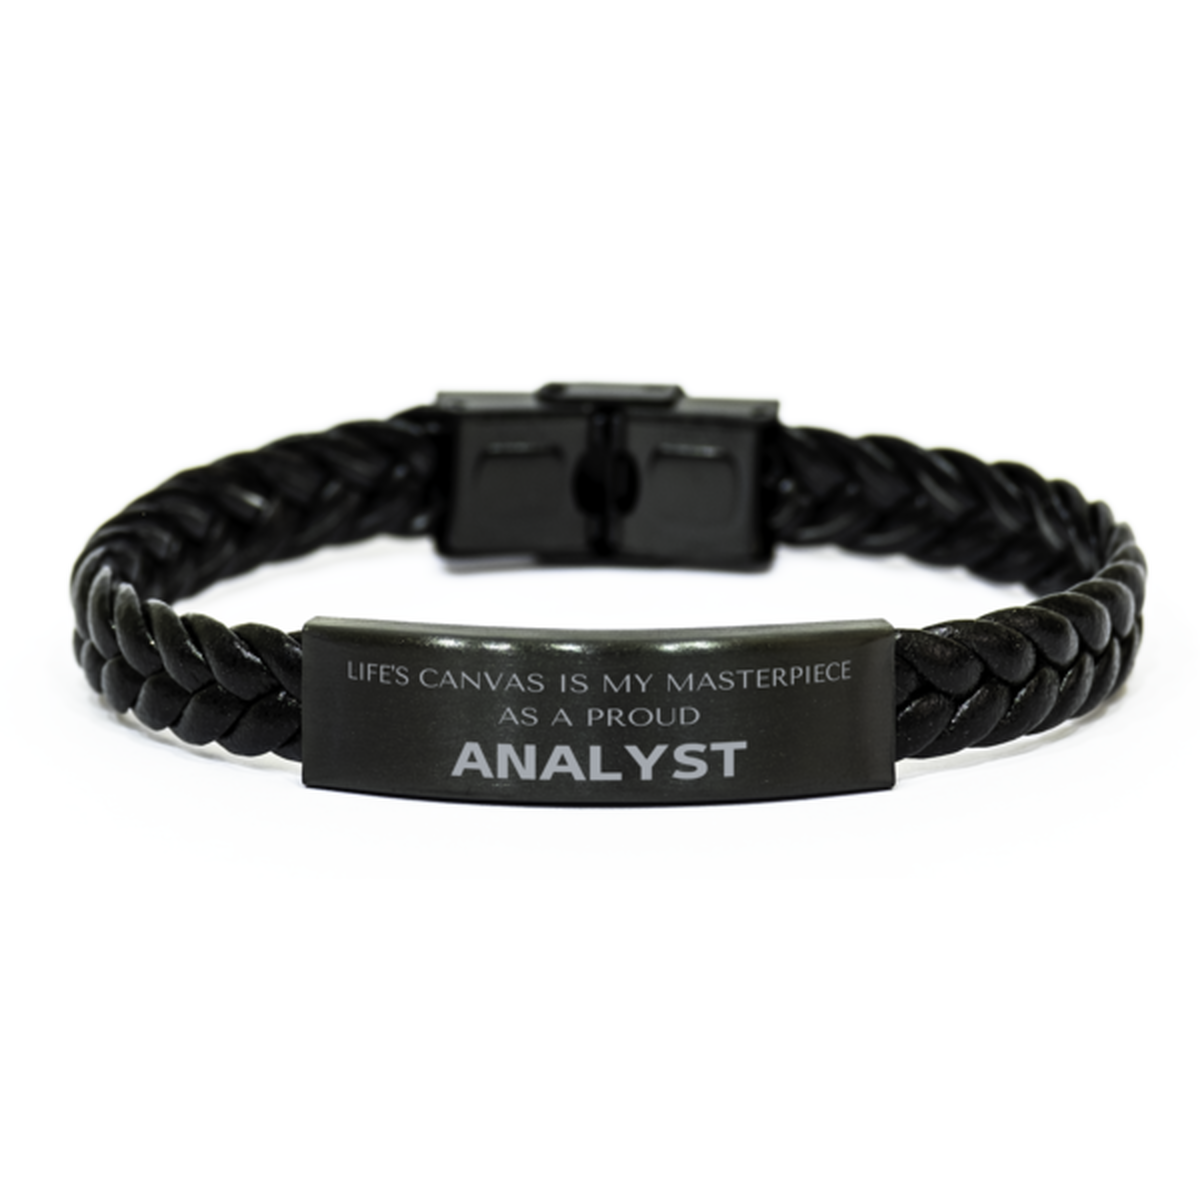 Proud Analyst Gifts, Life's canvas is my masterpiece, Epic Birthday Christmas Unique Braided Leather Bracelet For Analyst, Coworkers, Men, Women, Friends